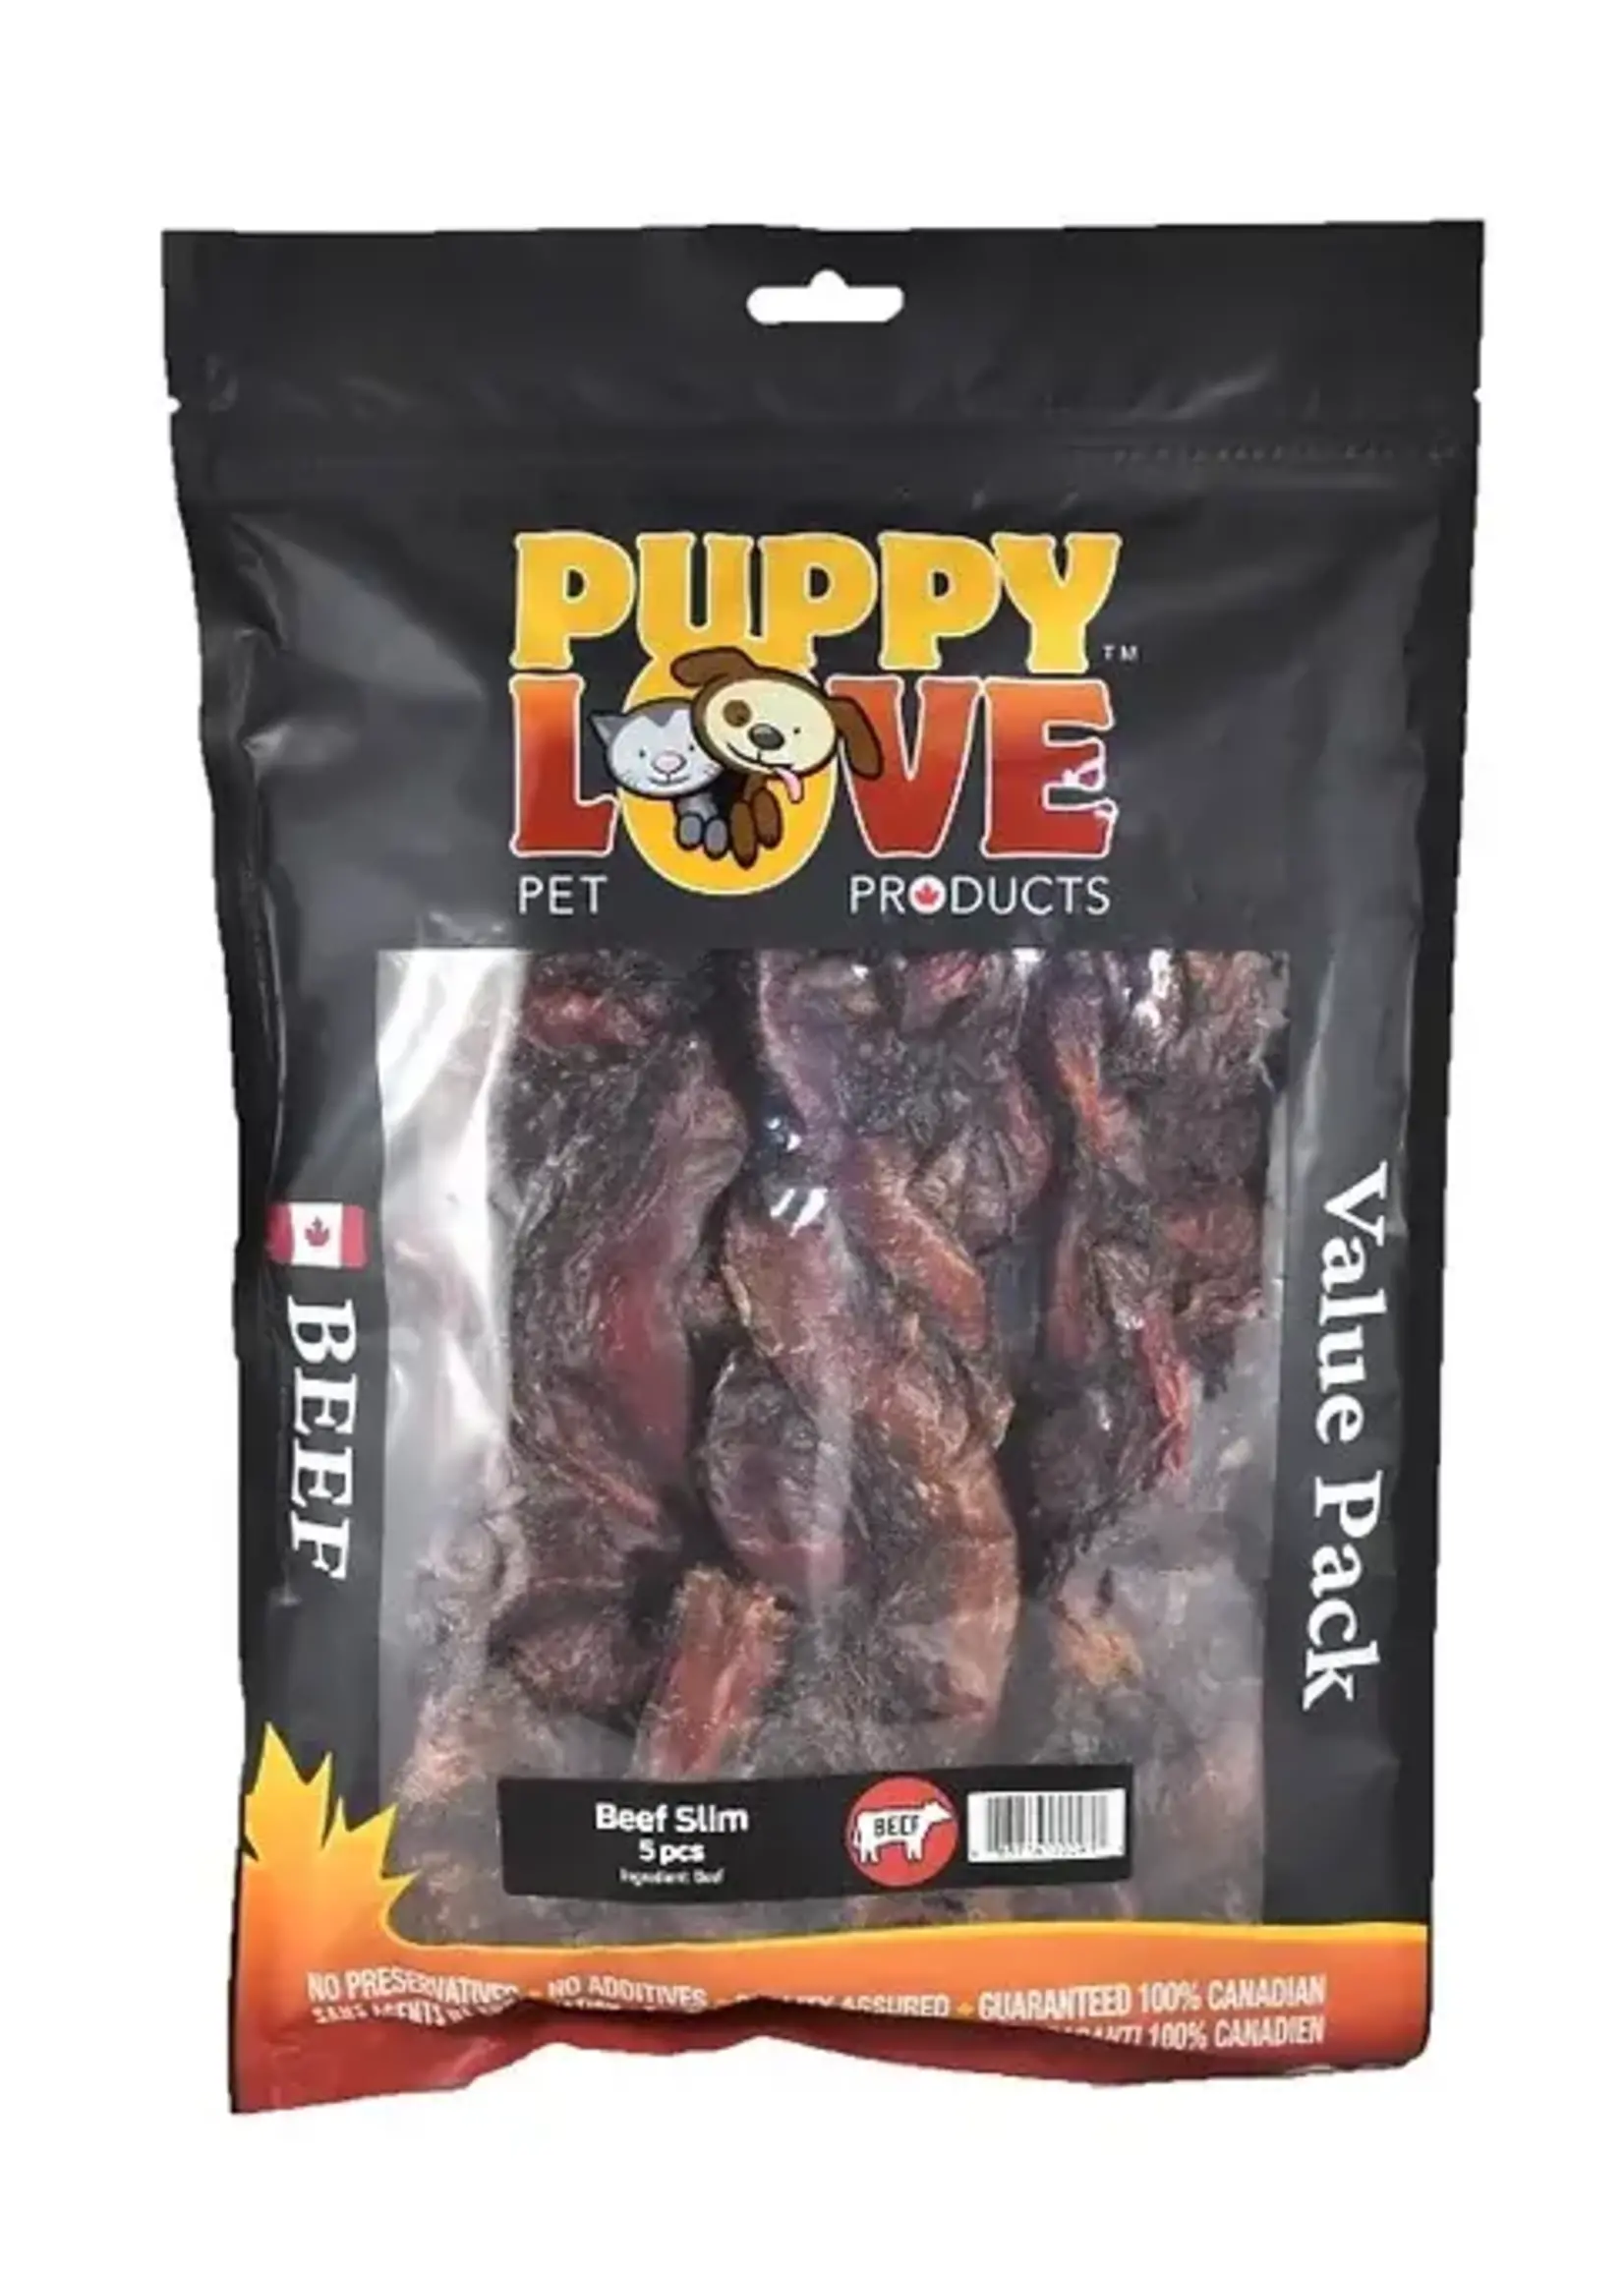 PUPPY LOVE PET PRODUCTS Puppy Love - Beef Slim - 5 Pack